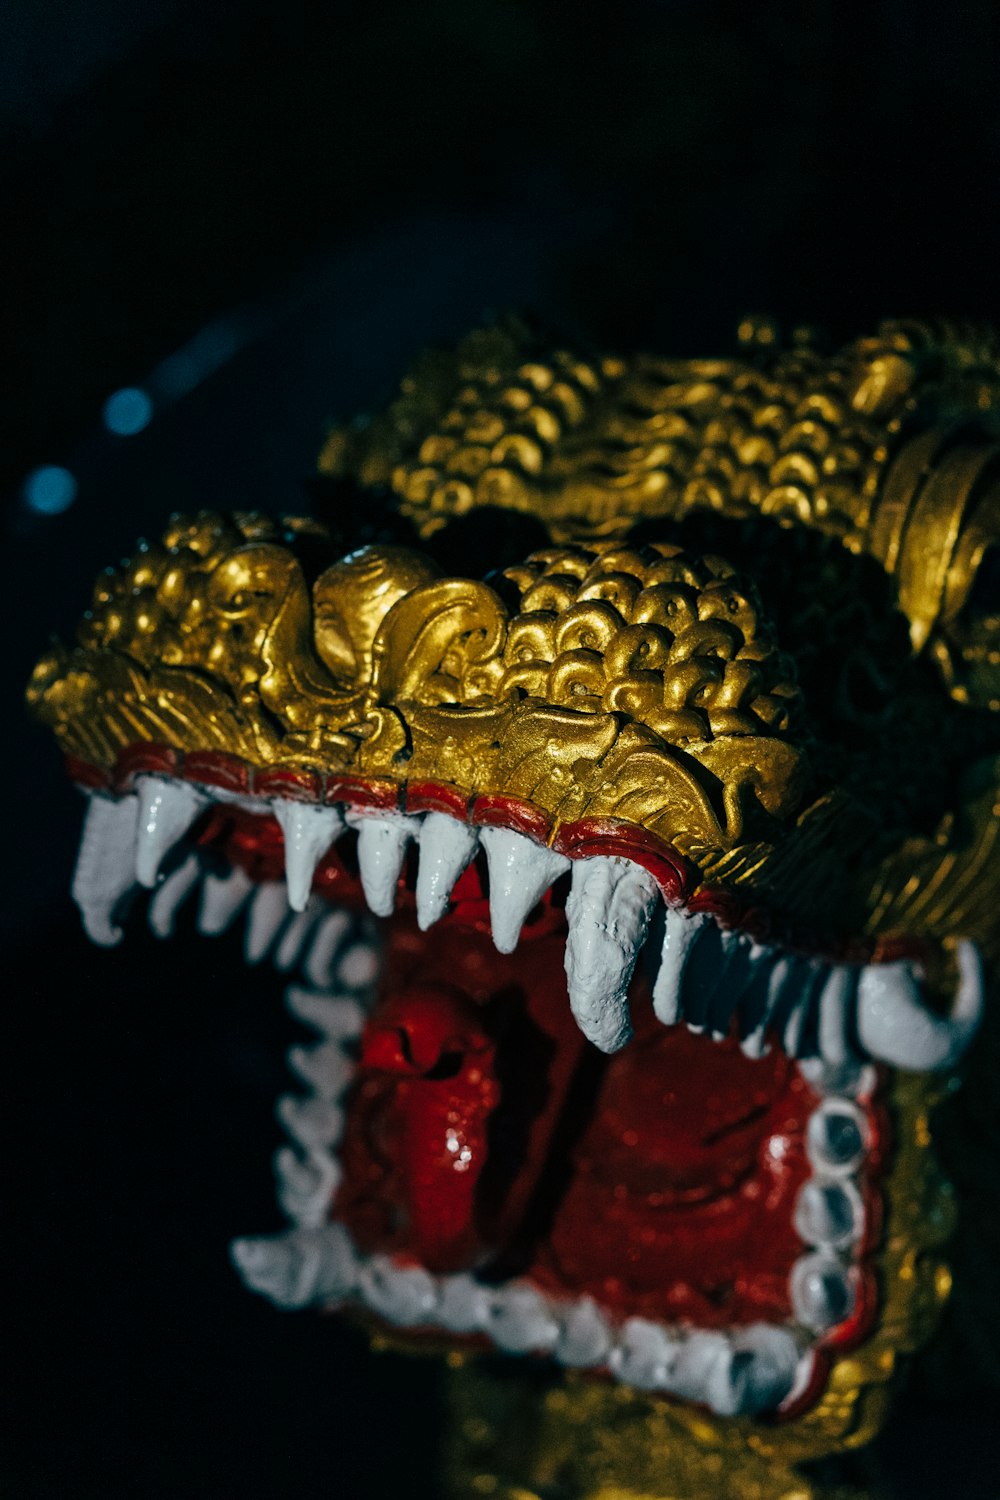 gold and red dragon figurine